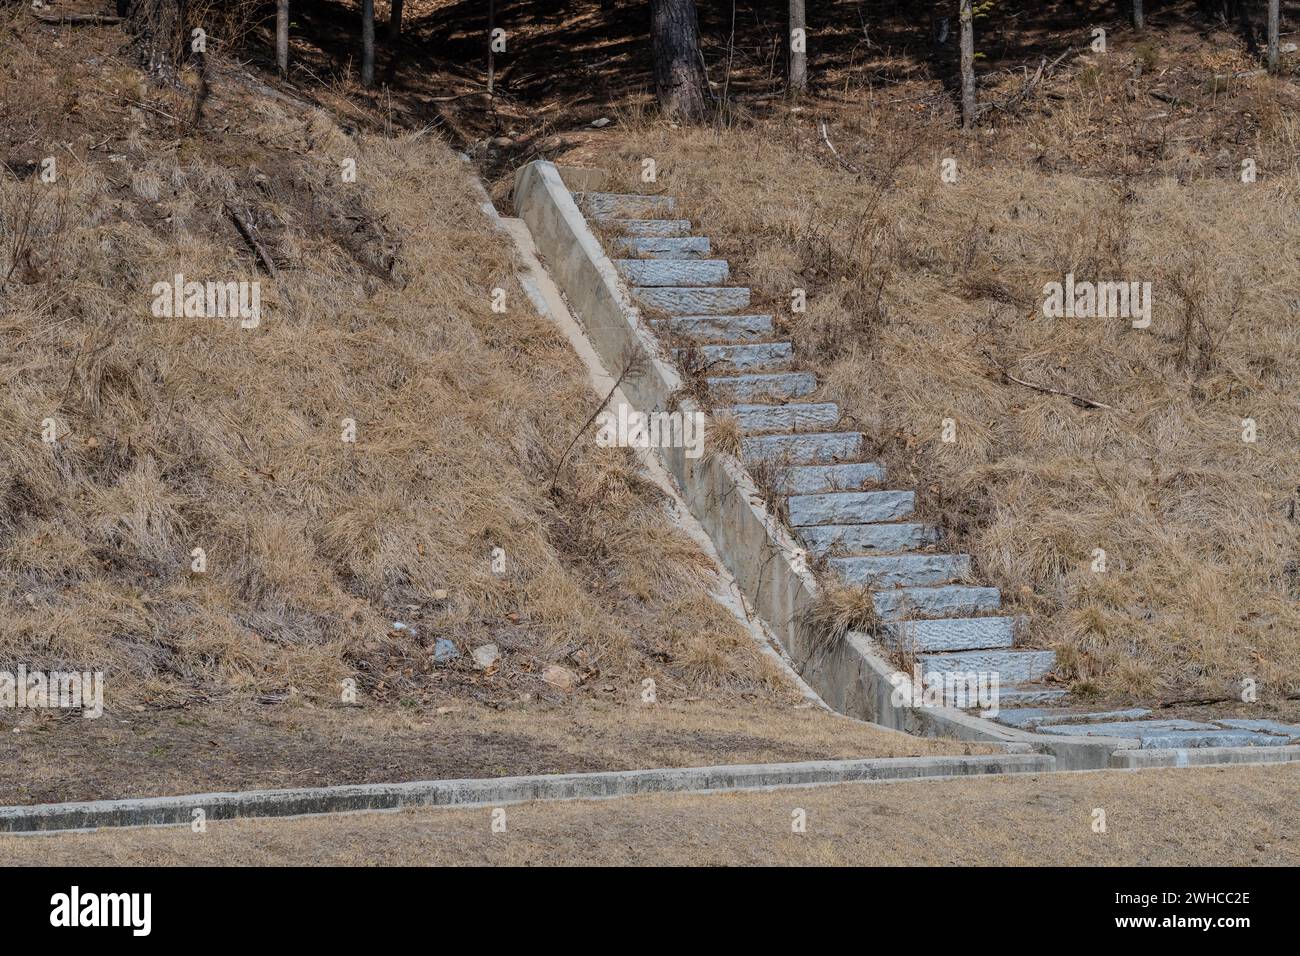 Concrete stairs on hillside in wilderness park in South Korea Stock Photo